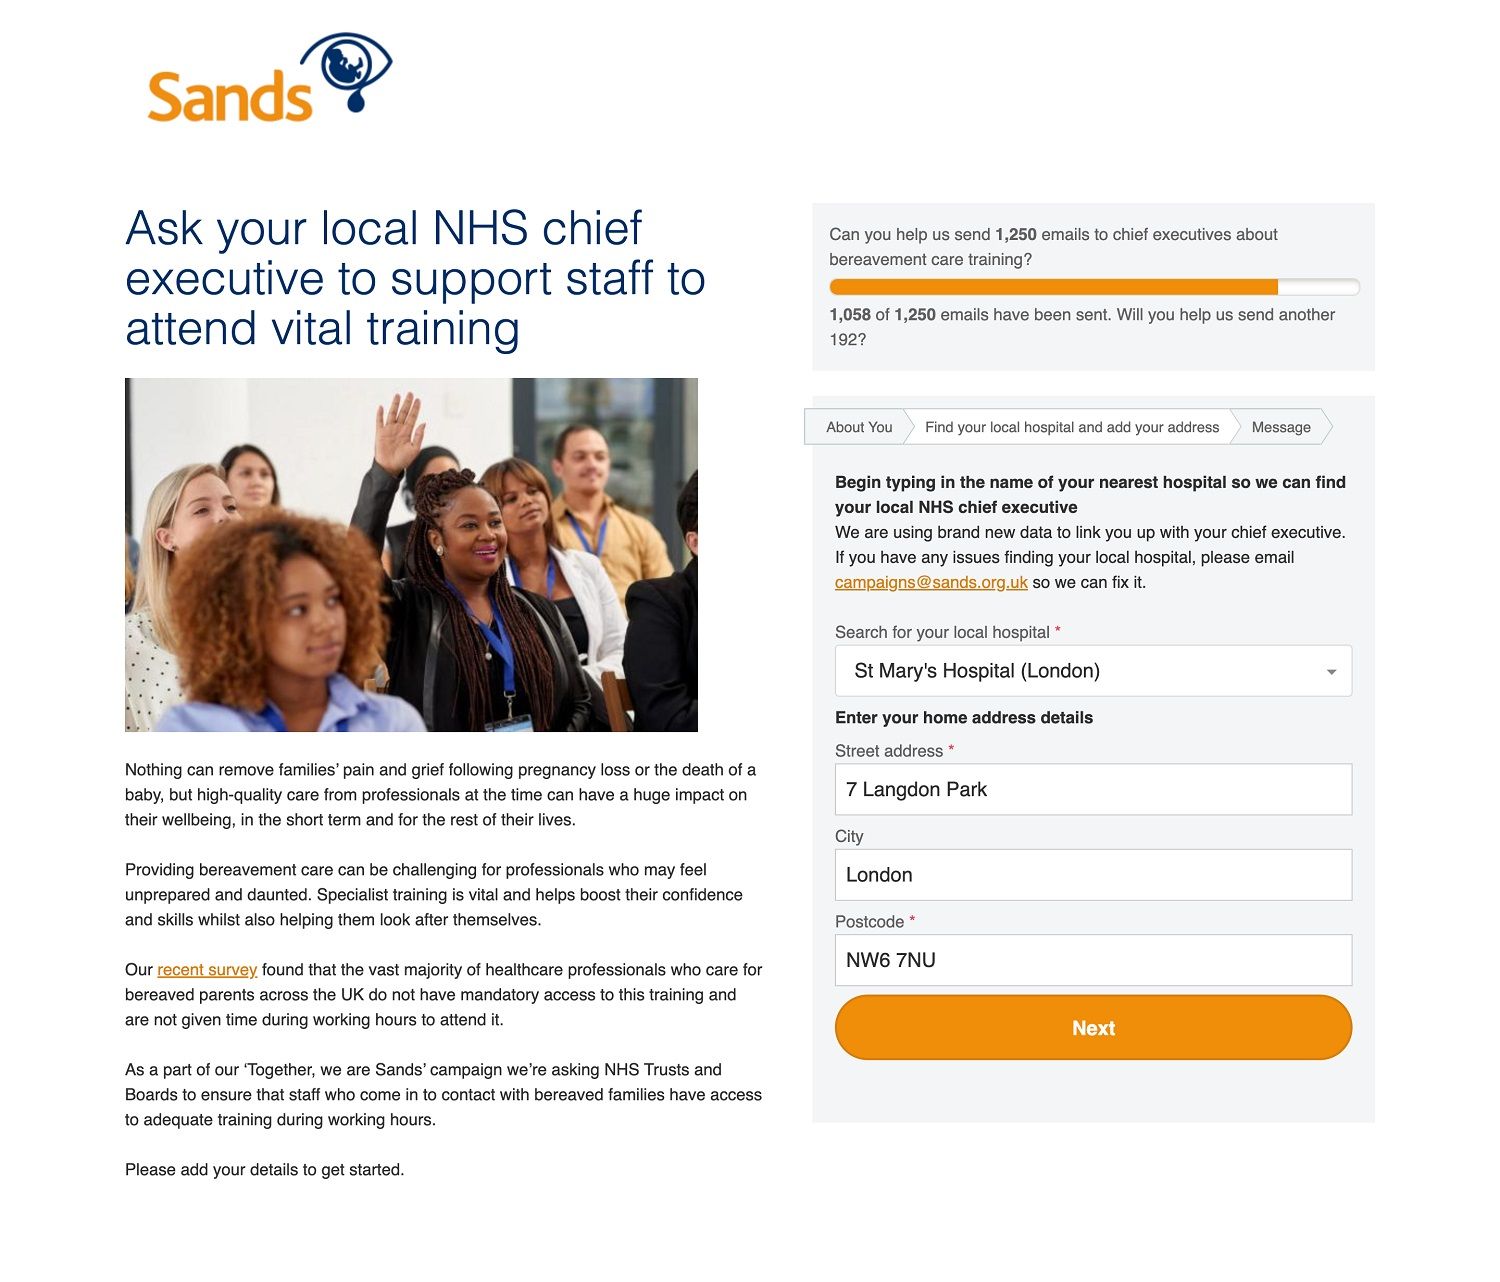 Webpage: Sands campaign action 'Ask your local NHS chief executiev to support staff to attend vital training. Form step shows 'Begin typing the name of your local hospital'